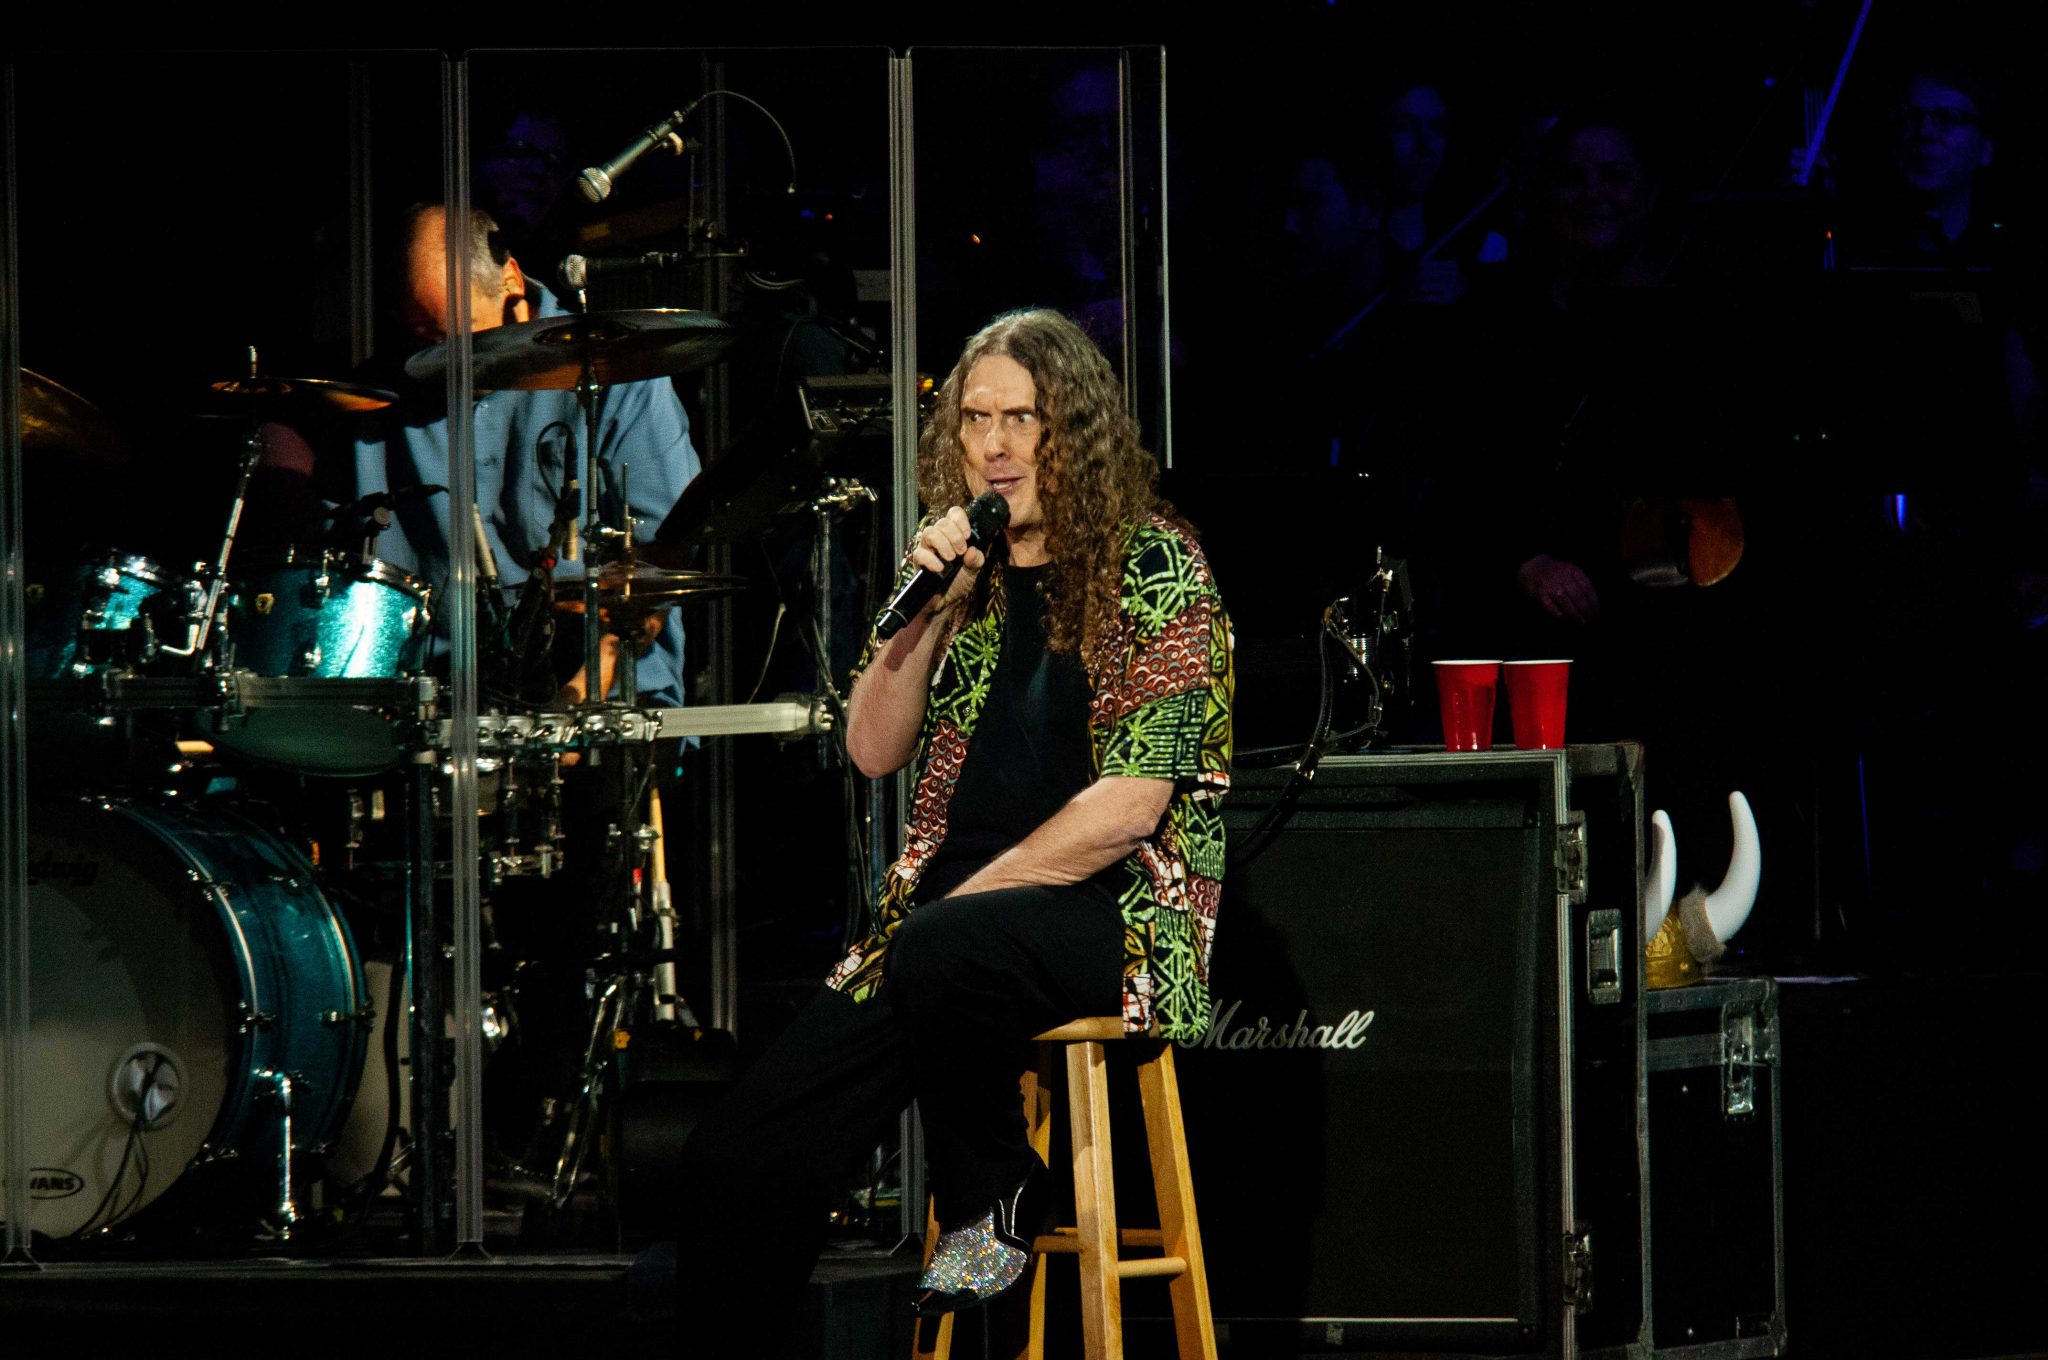 PHOTO: "Weird Al" Yankovic performing on stage at the Cynthia Woods Mitchell Pavilion June 15, 2019. Photo by The Signal Managing Editor Miles Shellshear.